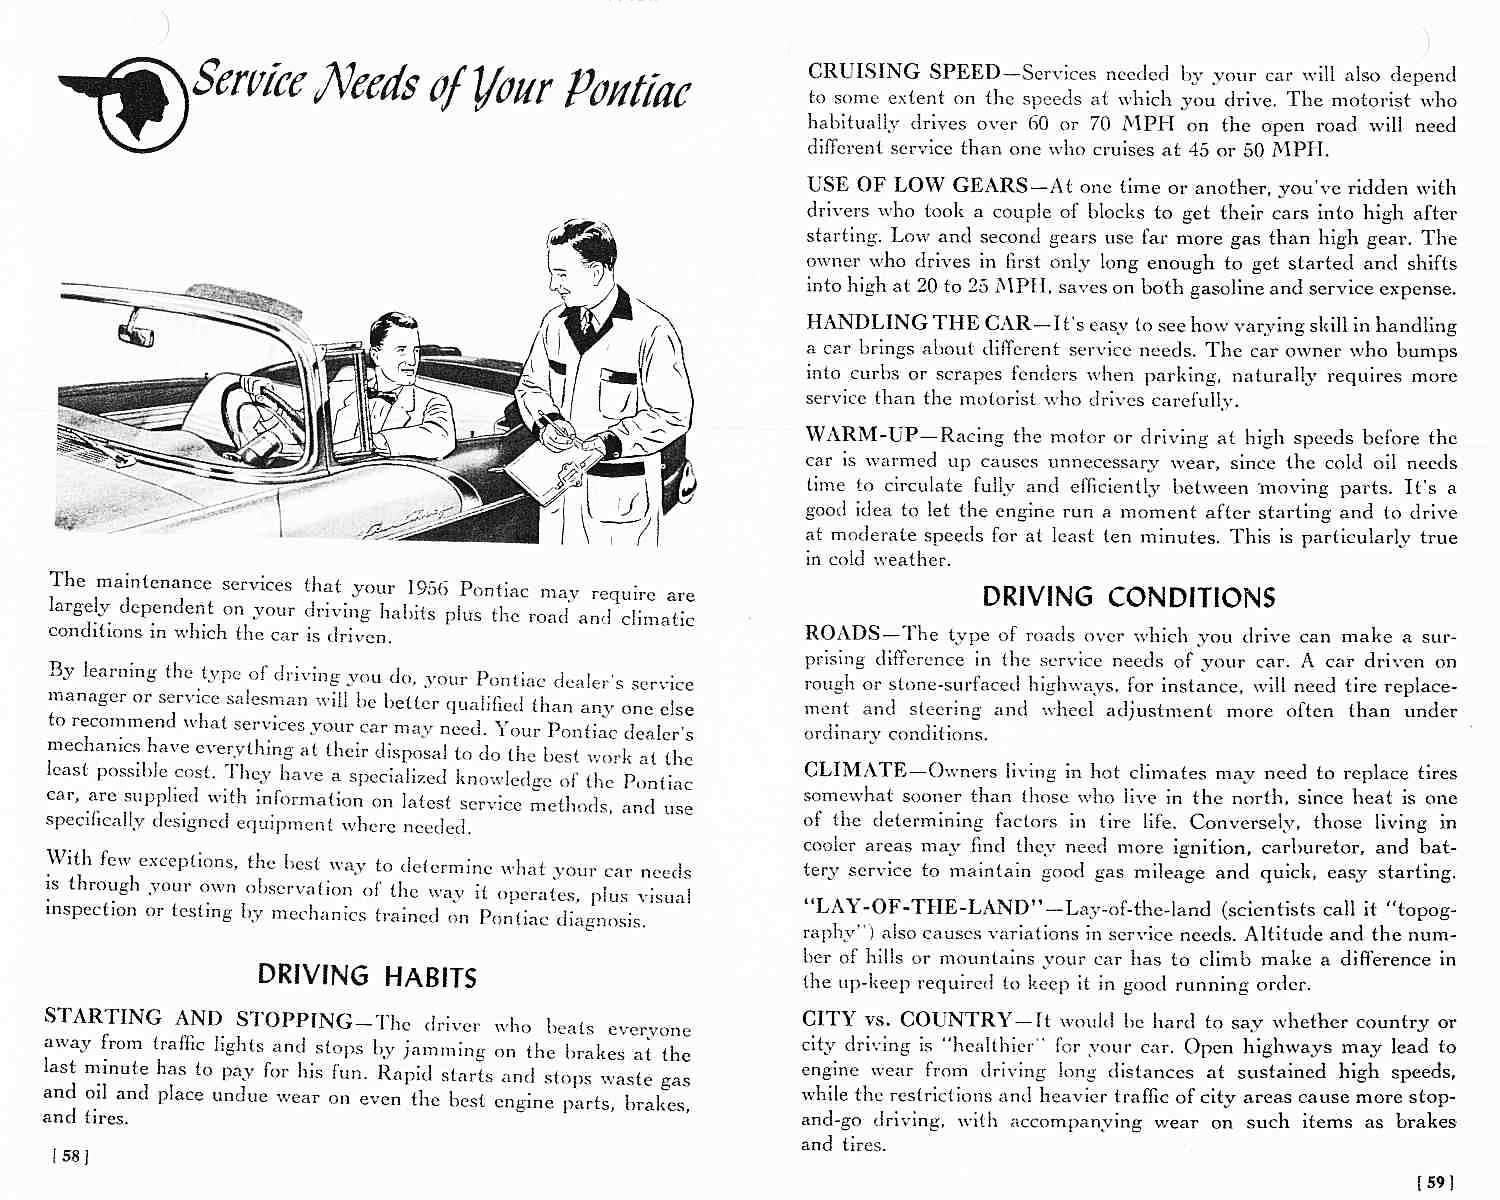 1956_Pontiac_Owners_Guide-58-59